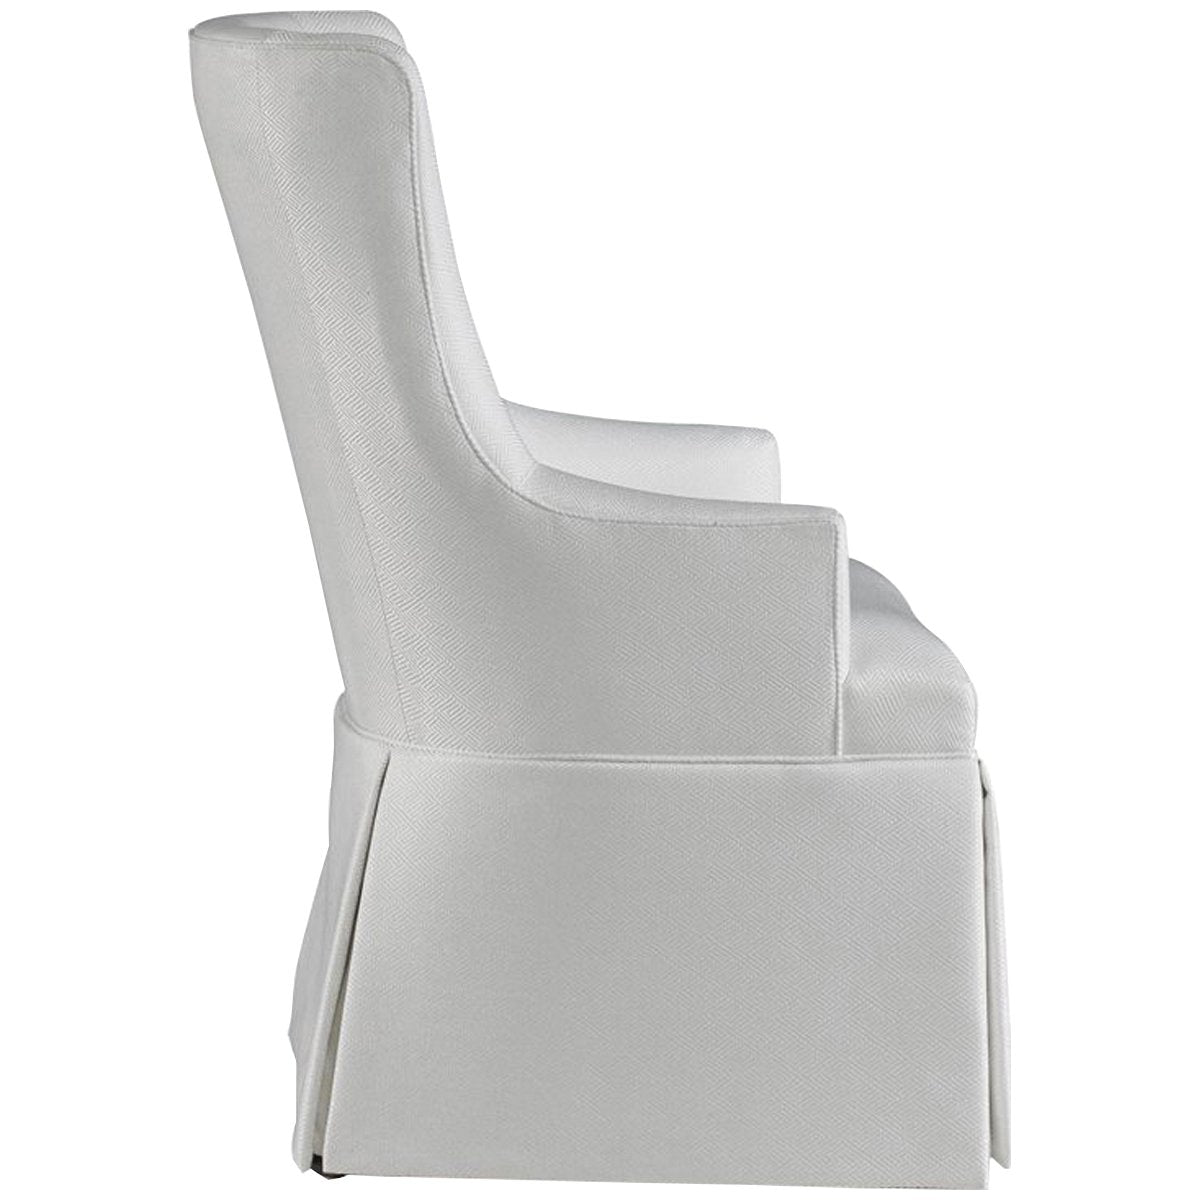 Hickory White Central Park Brooklyn Skirted Host Chair